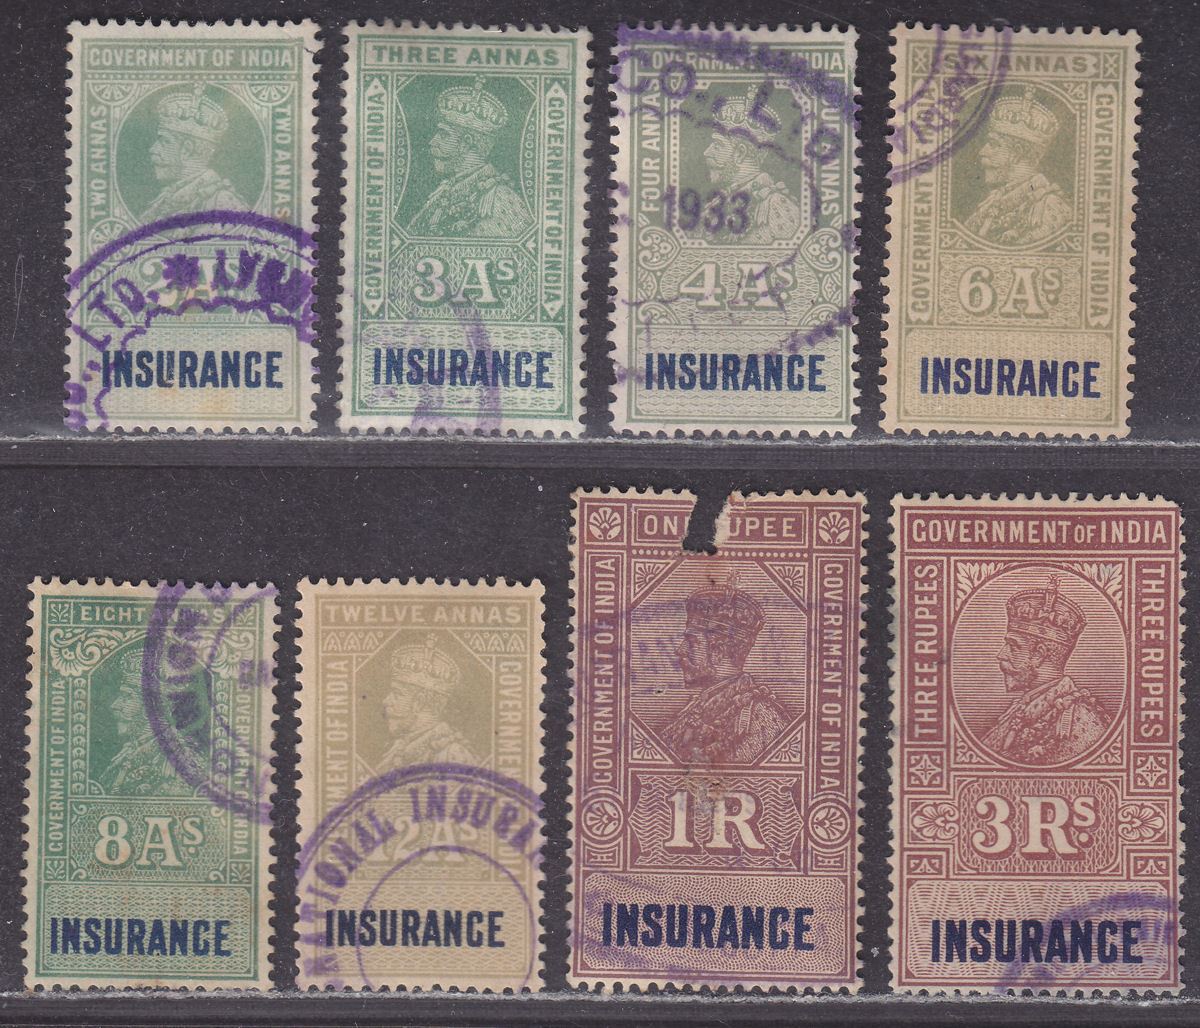 India 1926 KGV Revenue Insurance Selection 2a - 3r Used